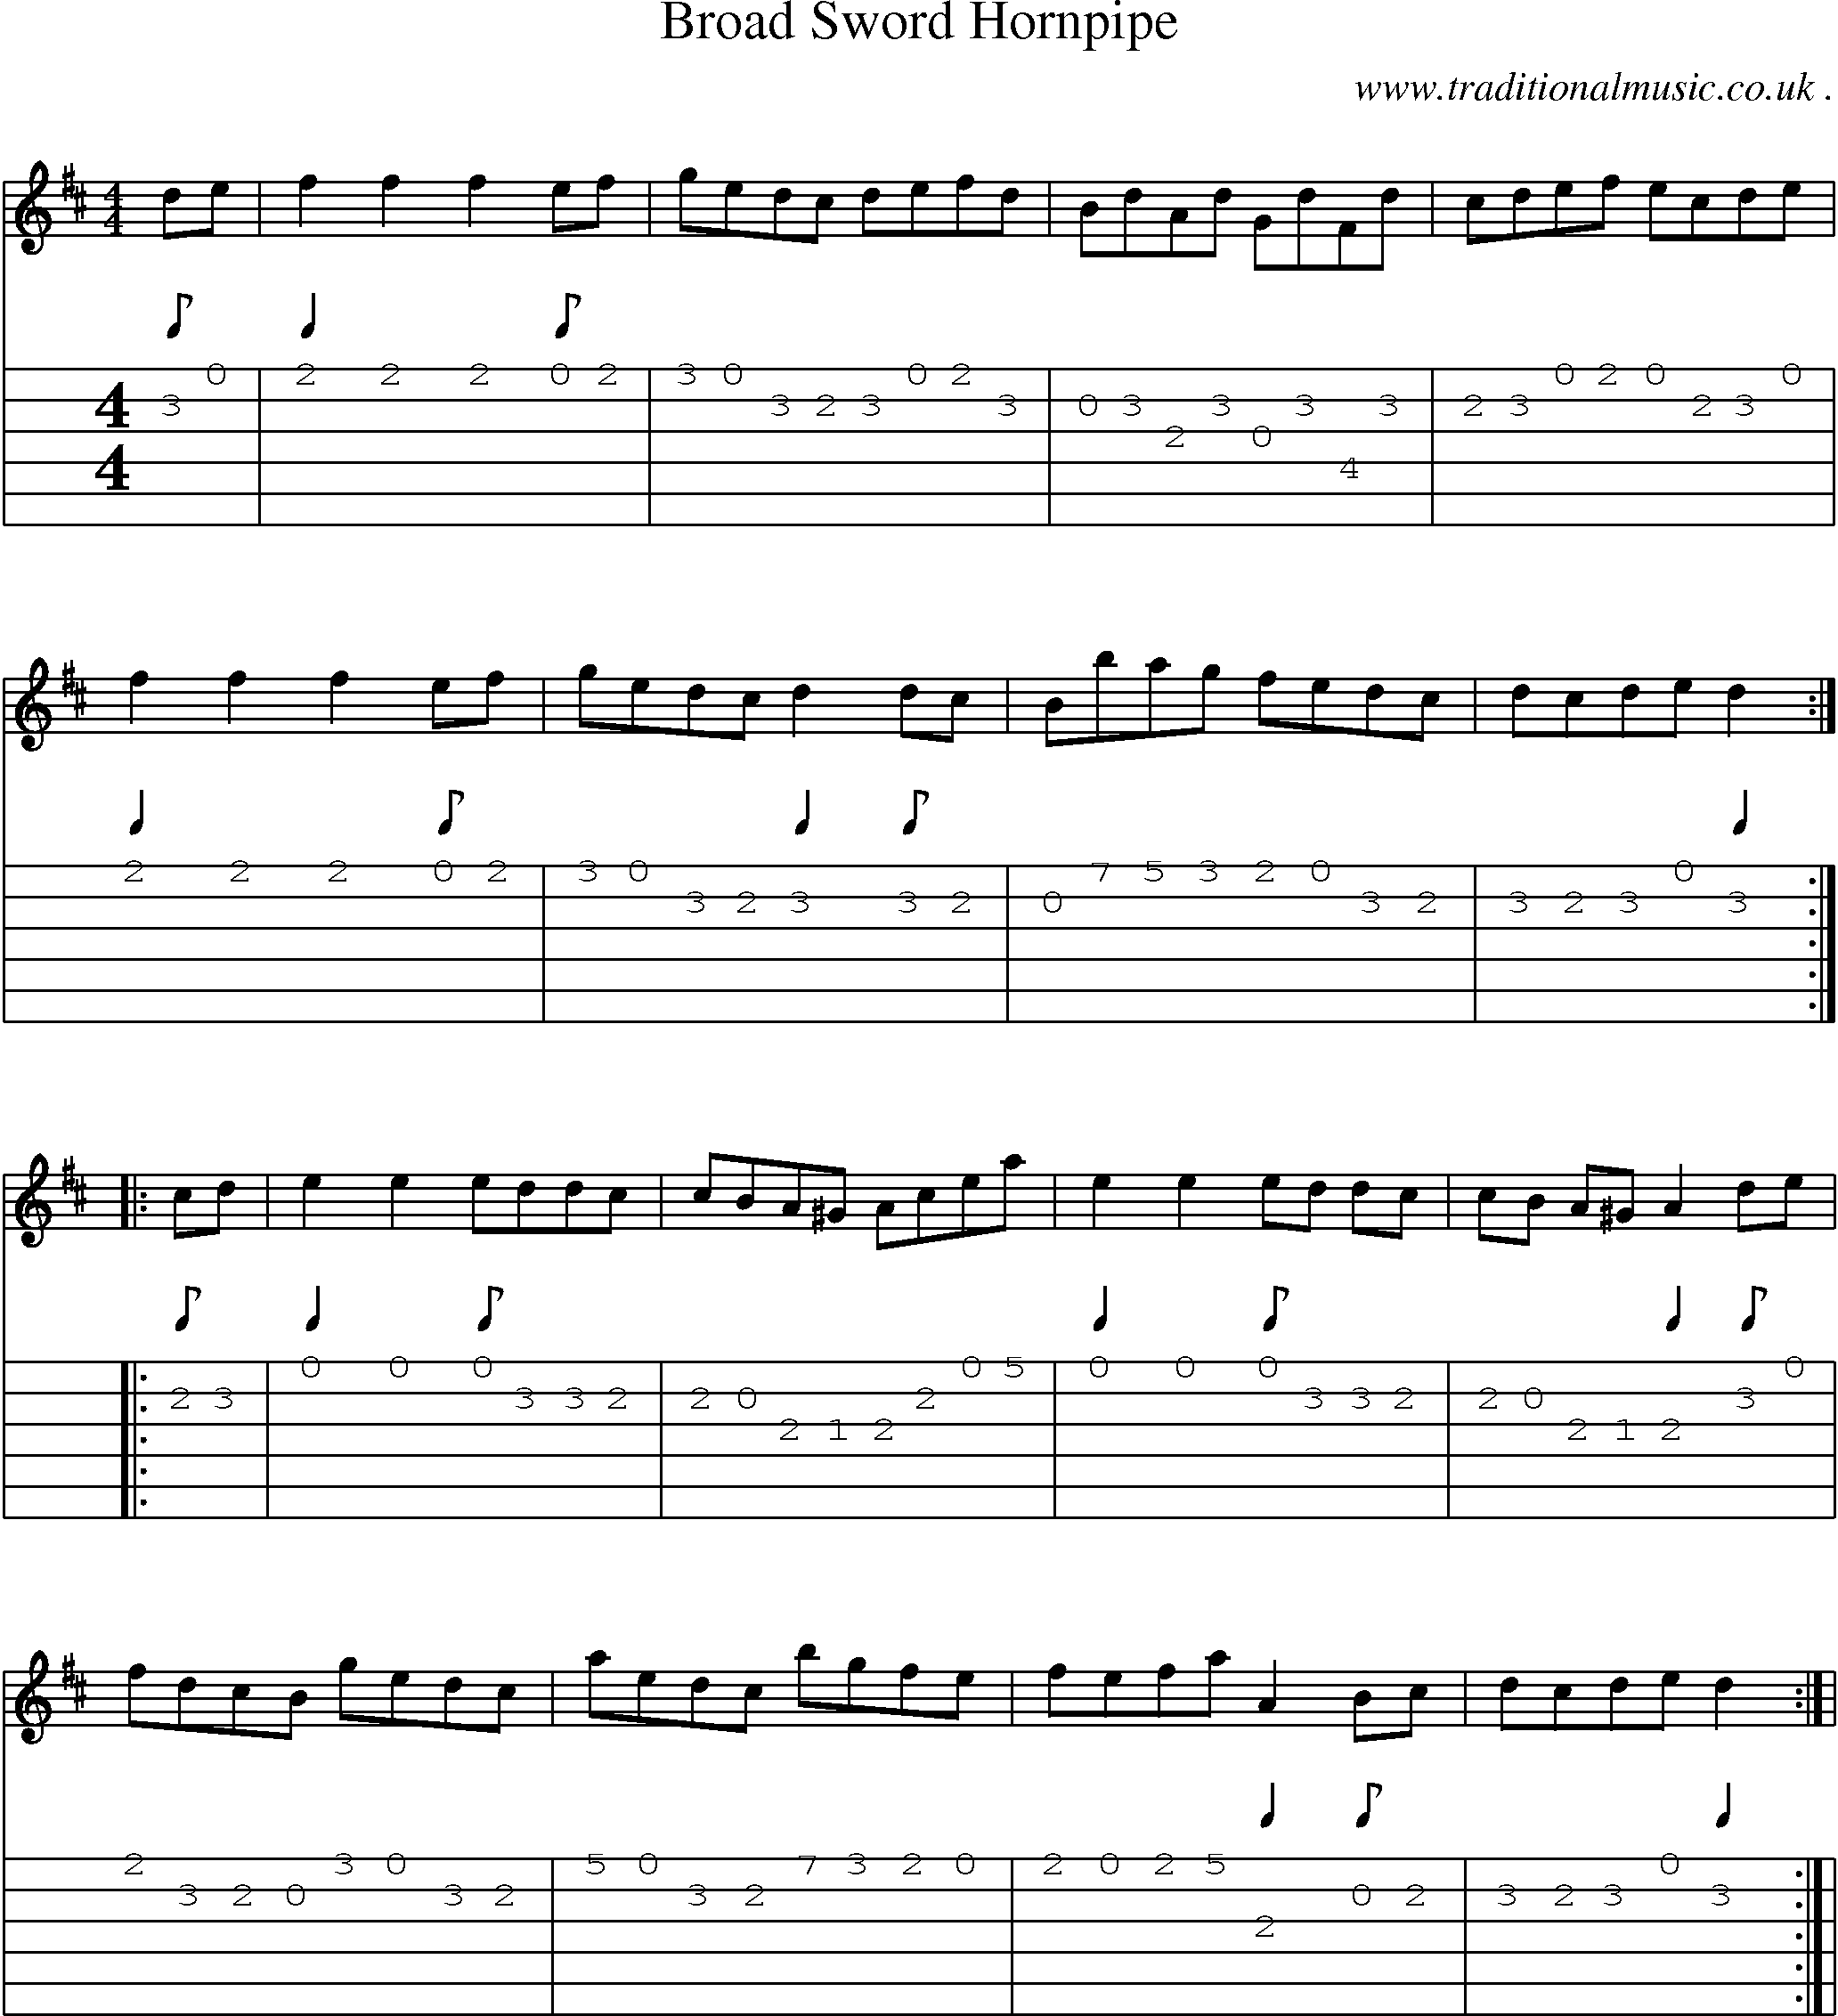 Sheet-Music and Guitar Tabs for Broad Sword Hornpipe